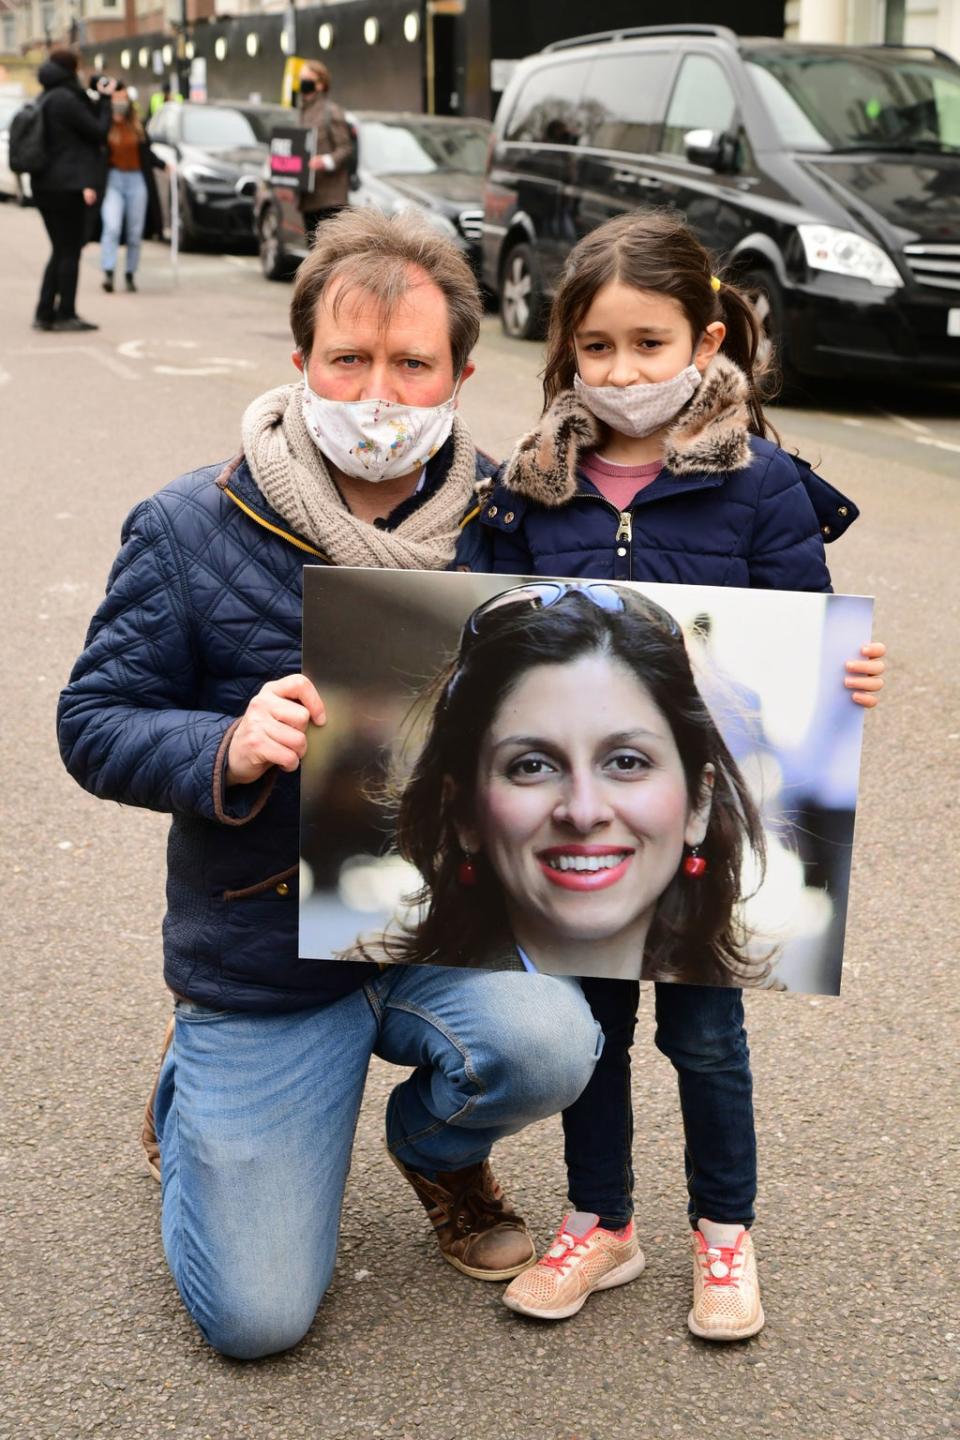 Richard Ratcliffe and his daughter Gabriella outside the Iranian Embassy in London (PA)